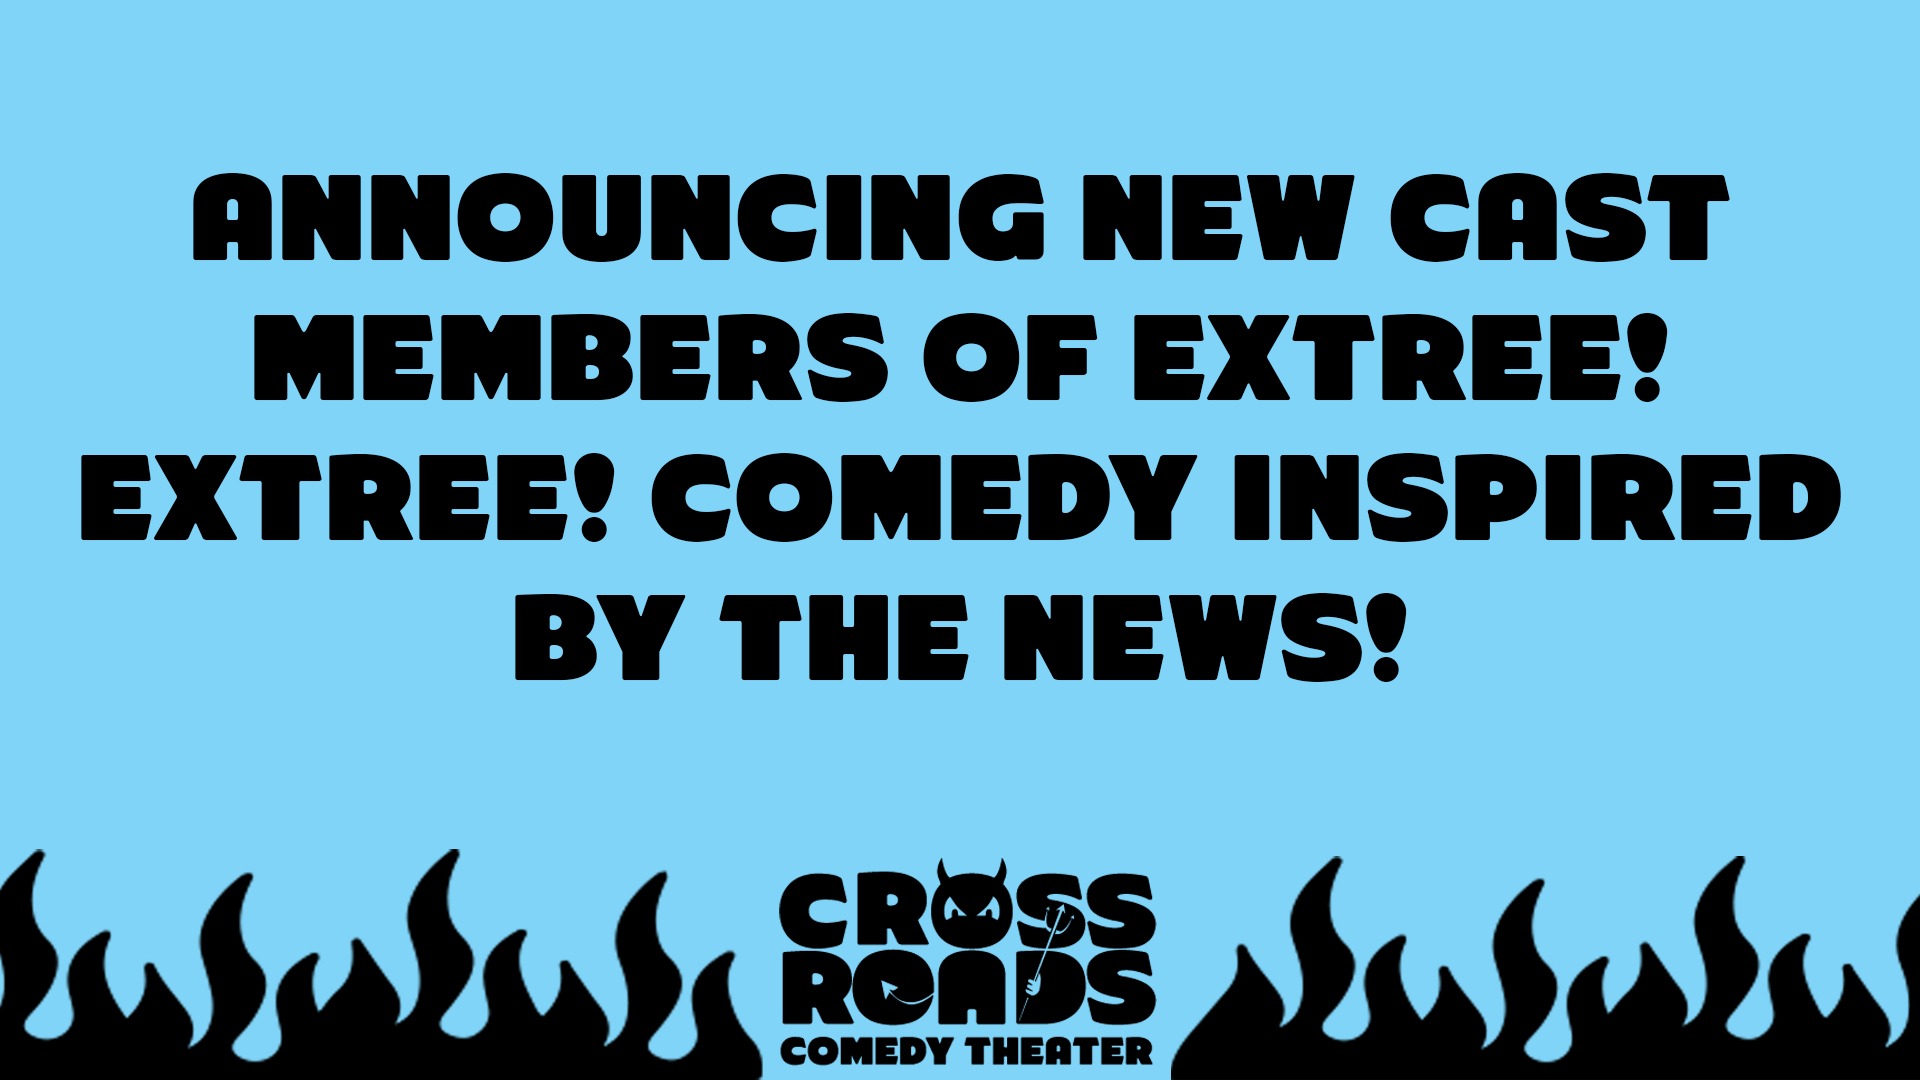 Announcing New Cast Members of Extree! Extree! Comedy Inspired By the News!